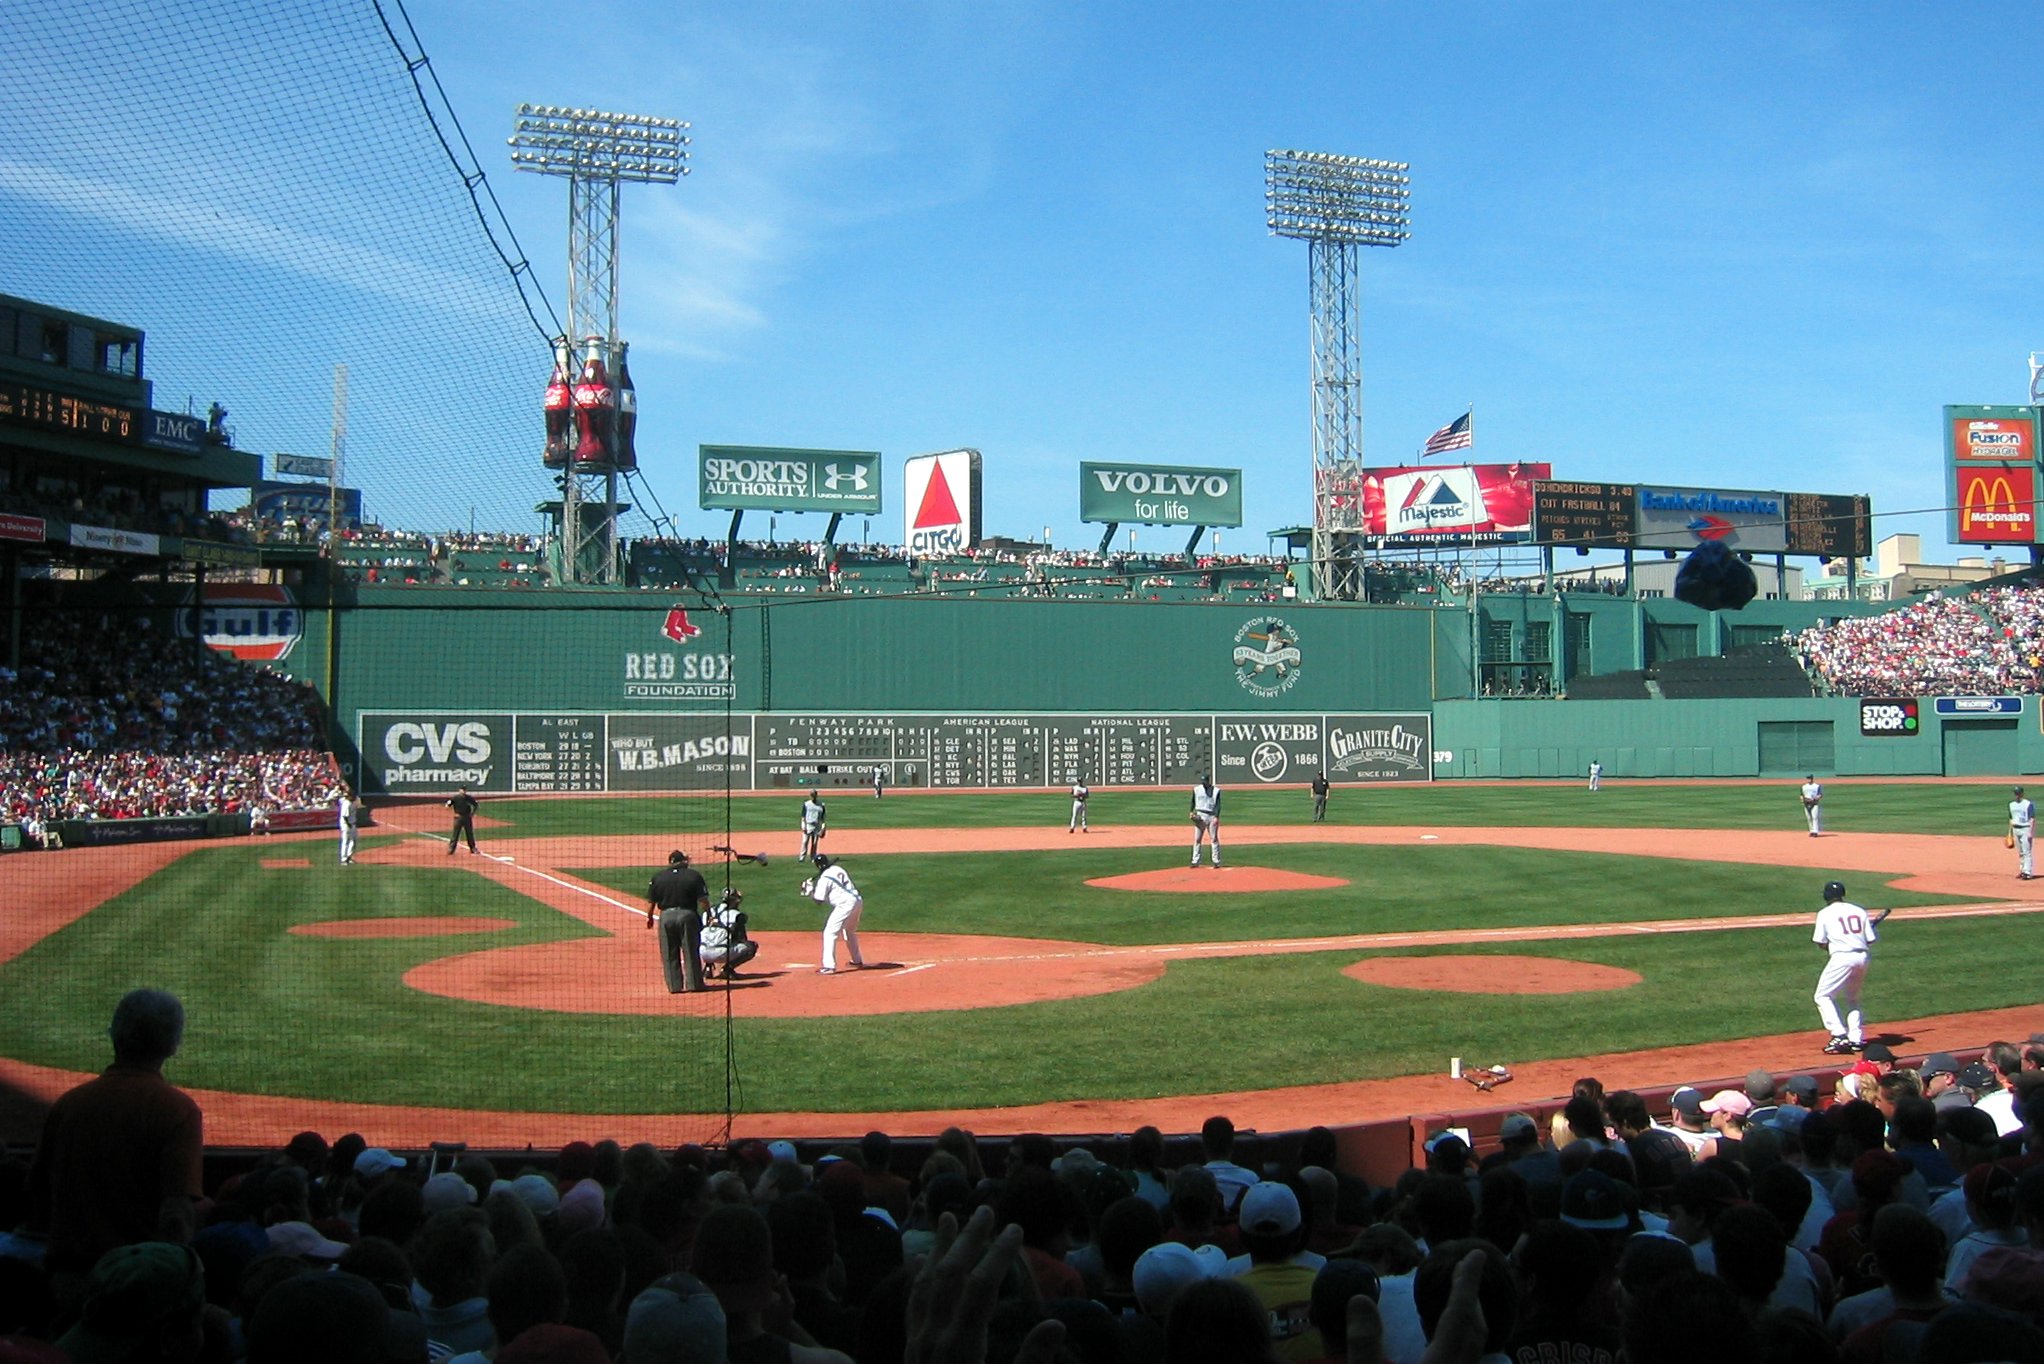 Red Sox: Fenway sellout streak ends at 820 games